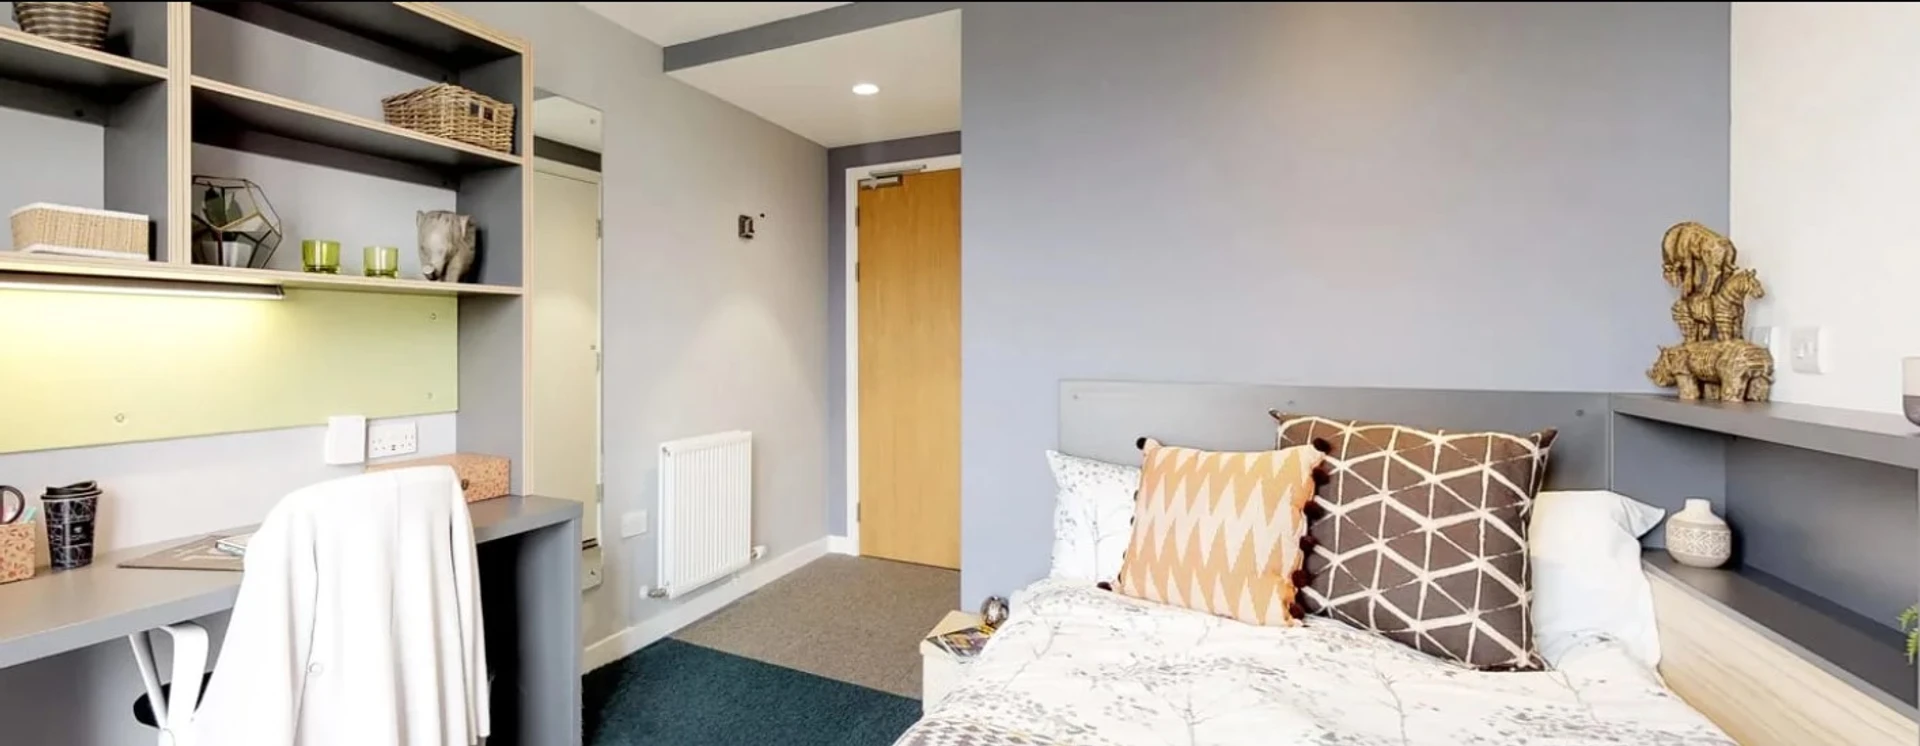 Room for rent in a shared flat in Glasgow